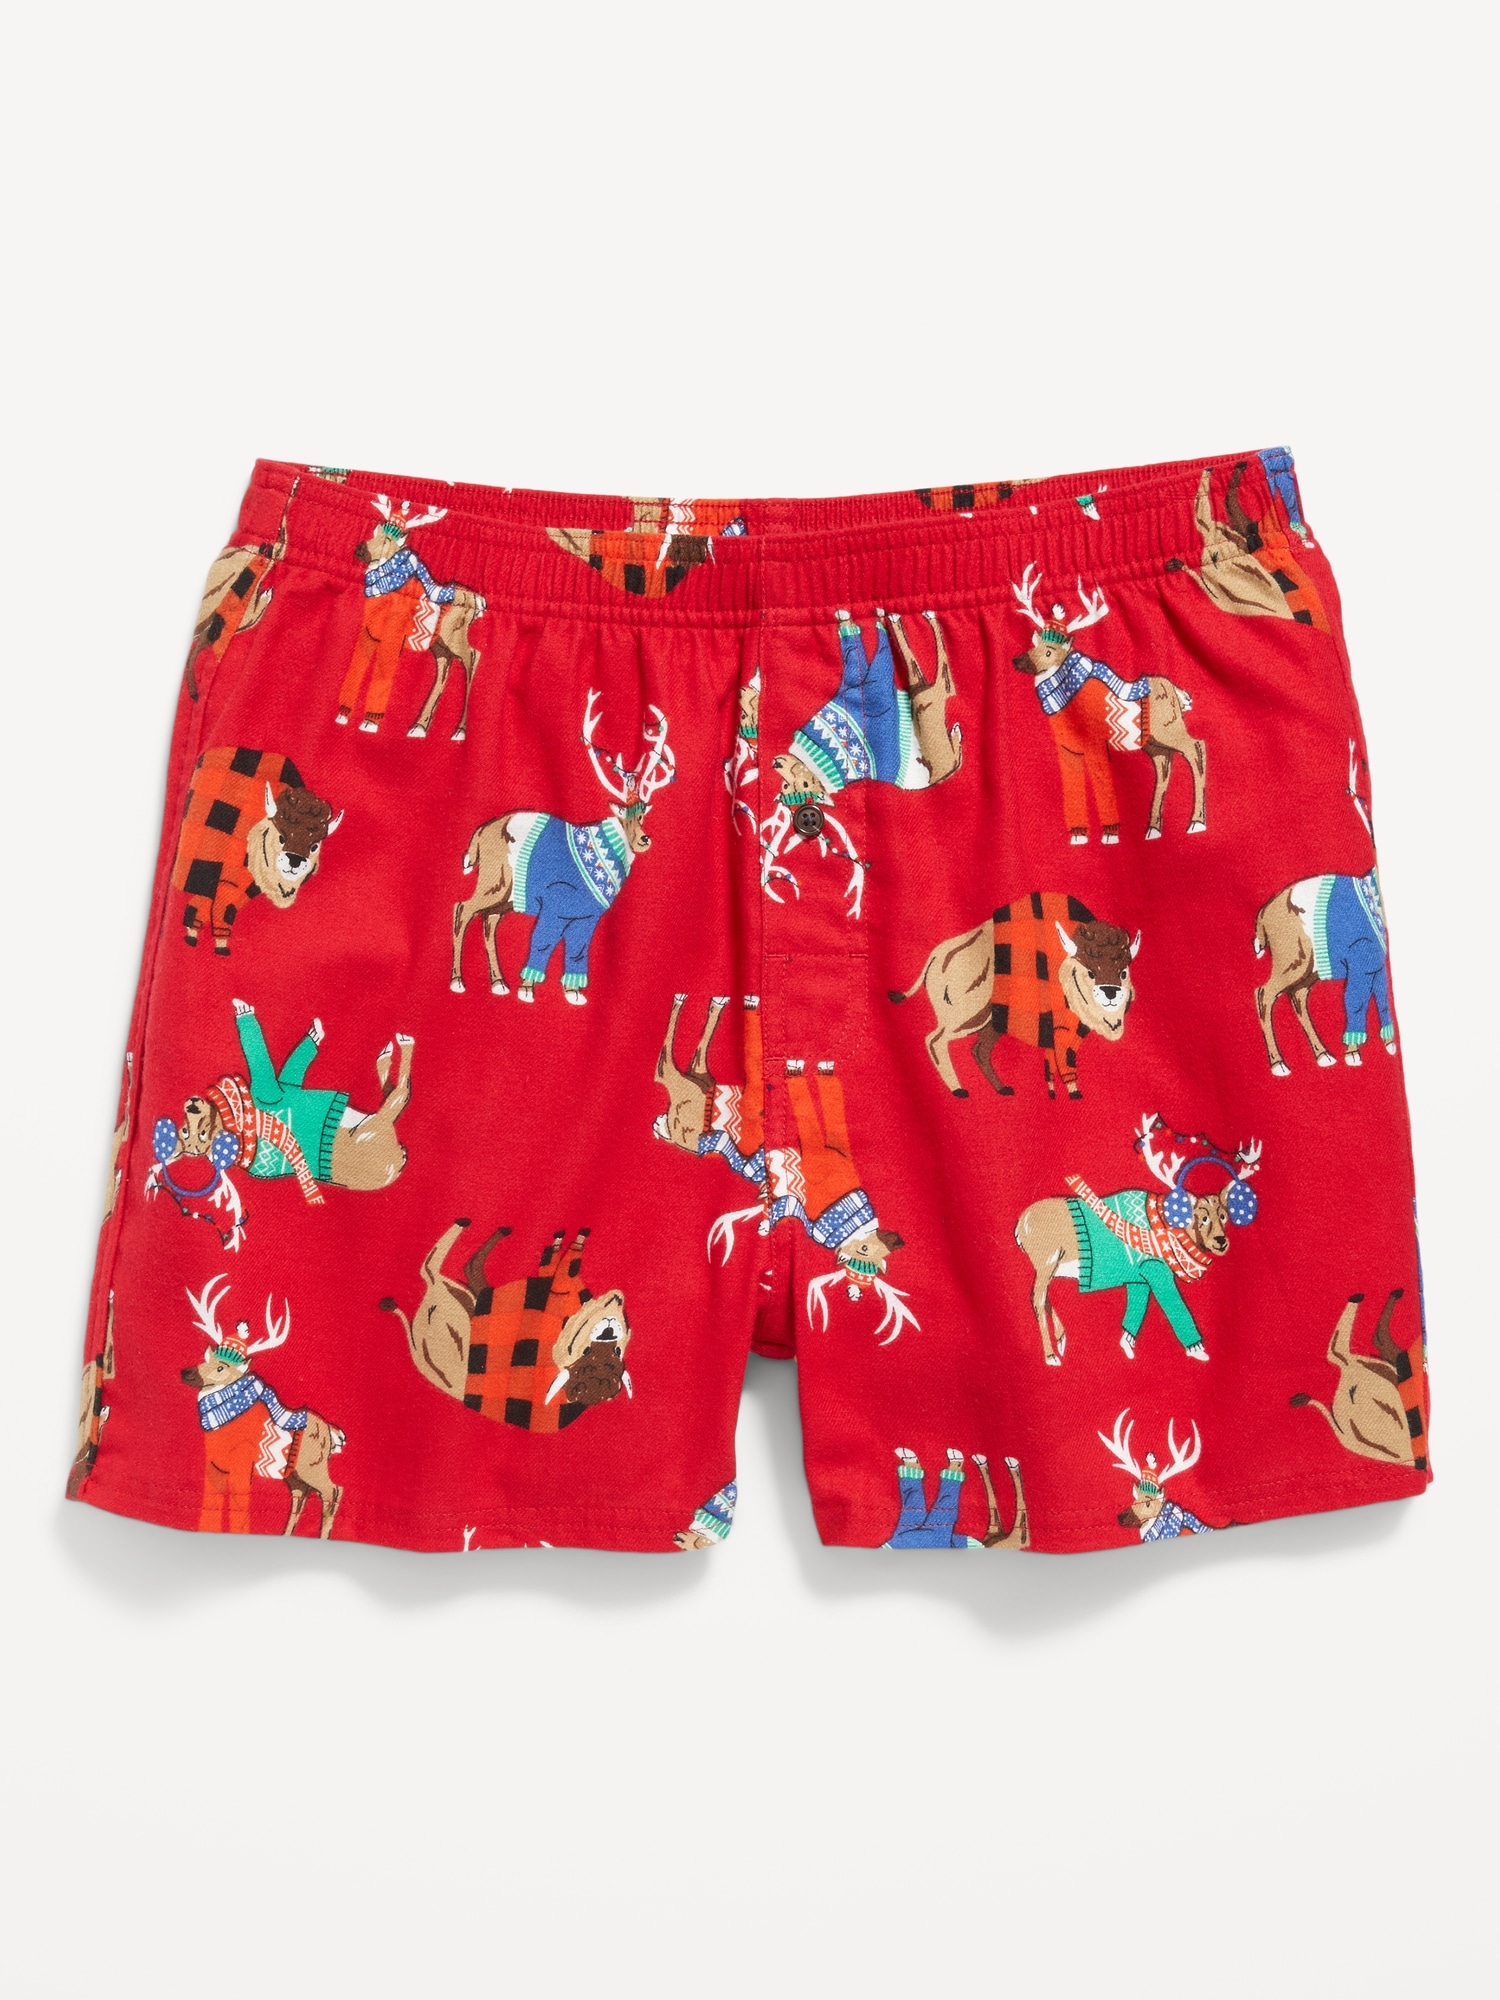 Printed Flannel Boxer Shorts -- 3.75-inch inseam